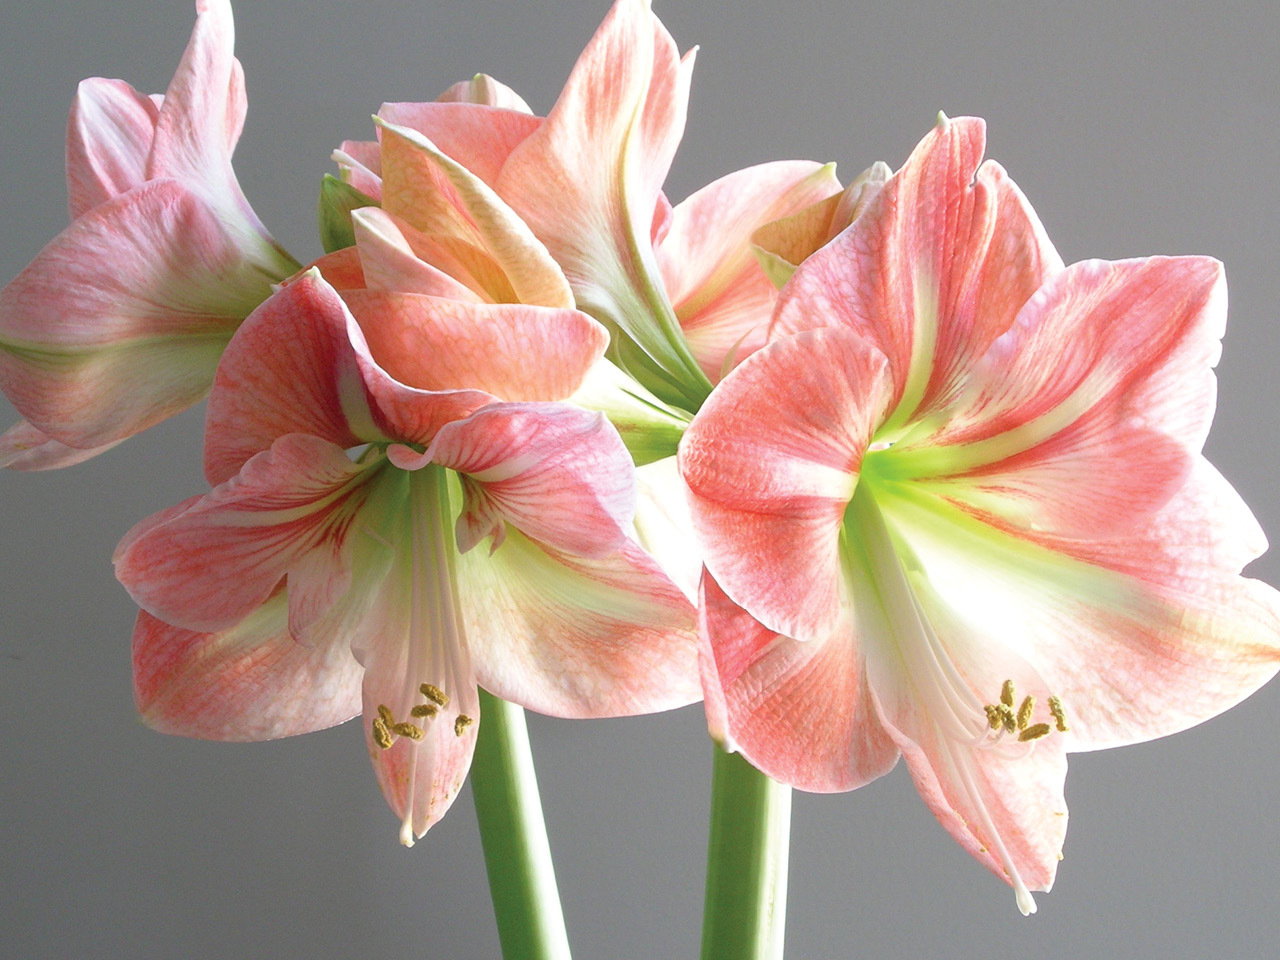 A close up of amaryllis flowers on a grey background